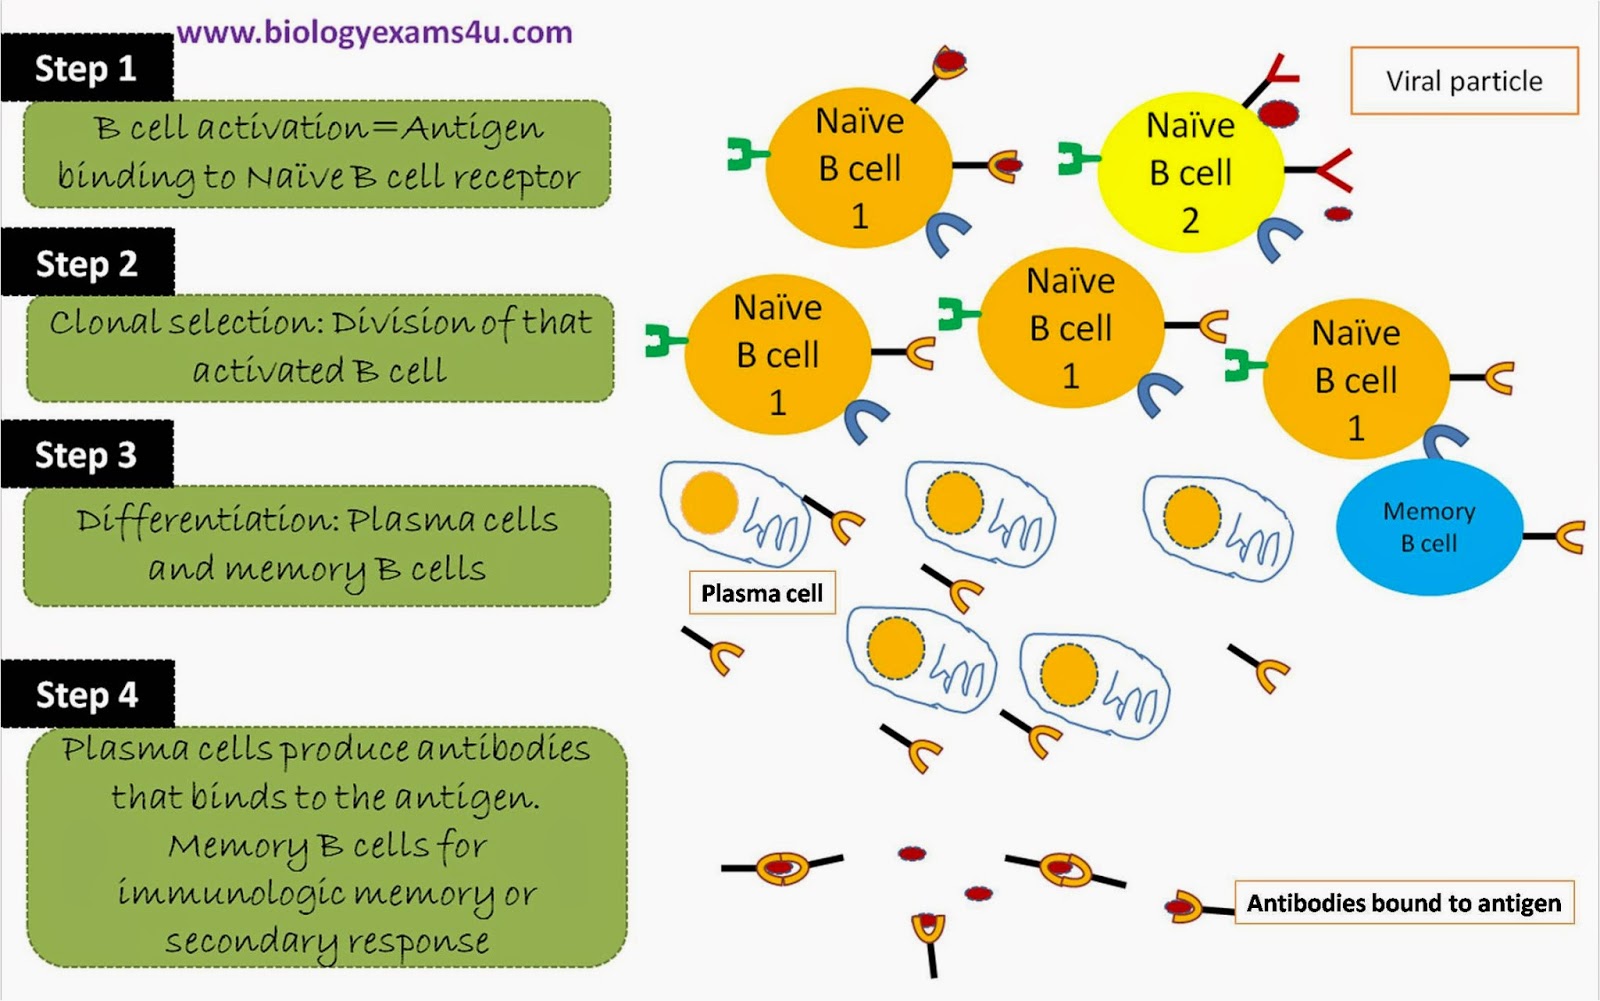 Humoral Immune Response: Definition and Summary of Steps involved